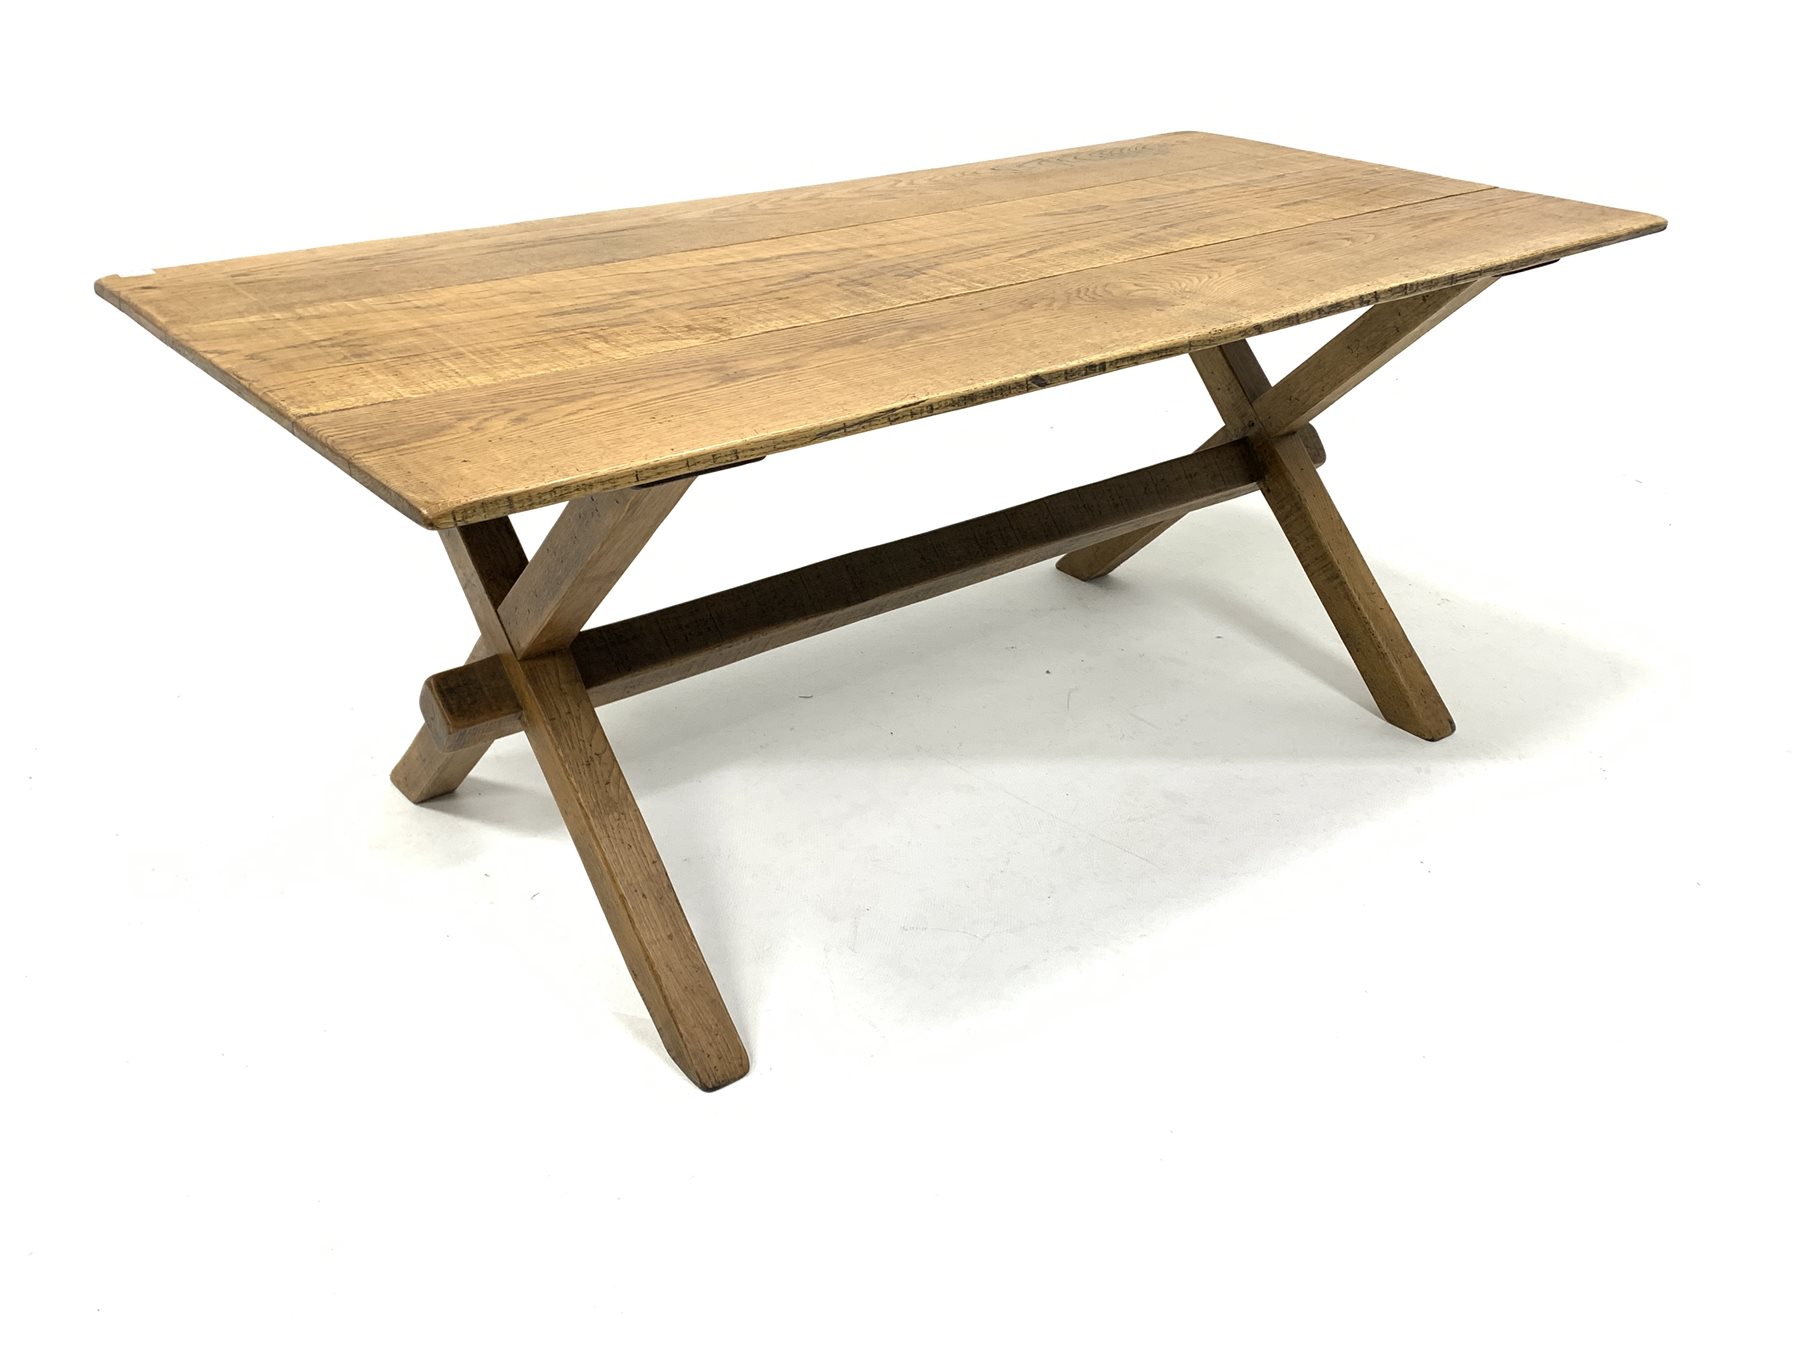 Early 20th century oak refectory style dining table, with rectangular top raised on 'X' supports uni